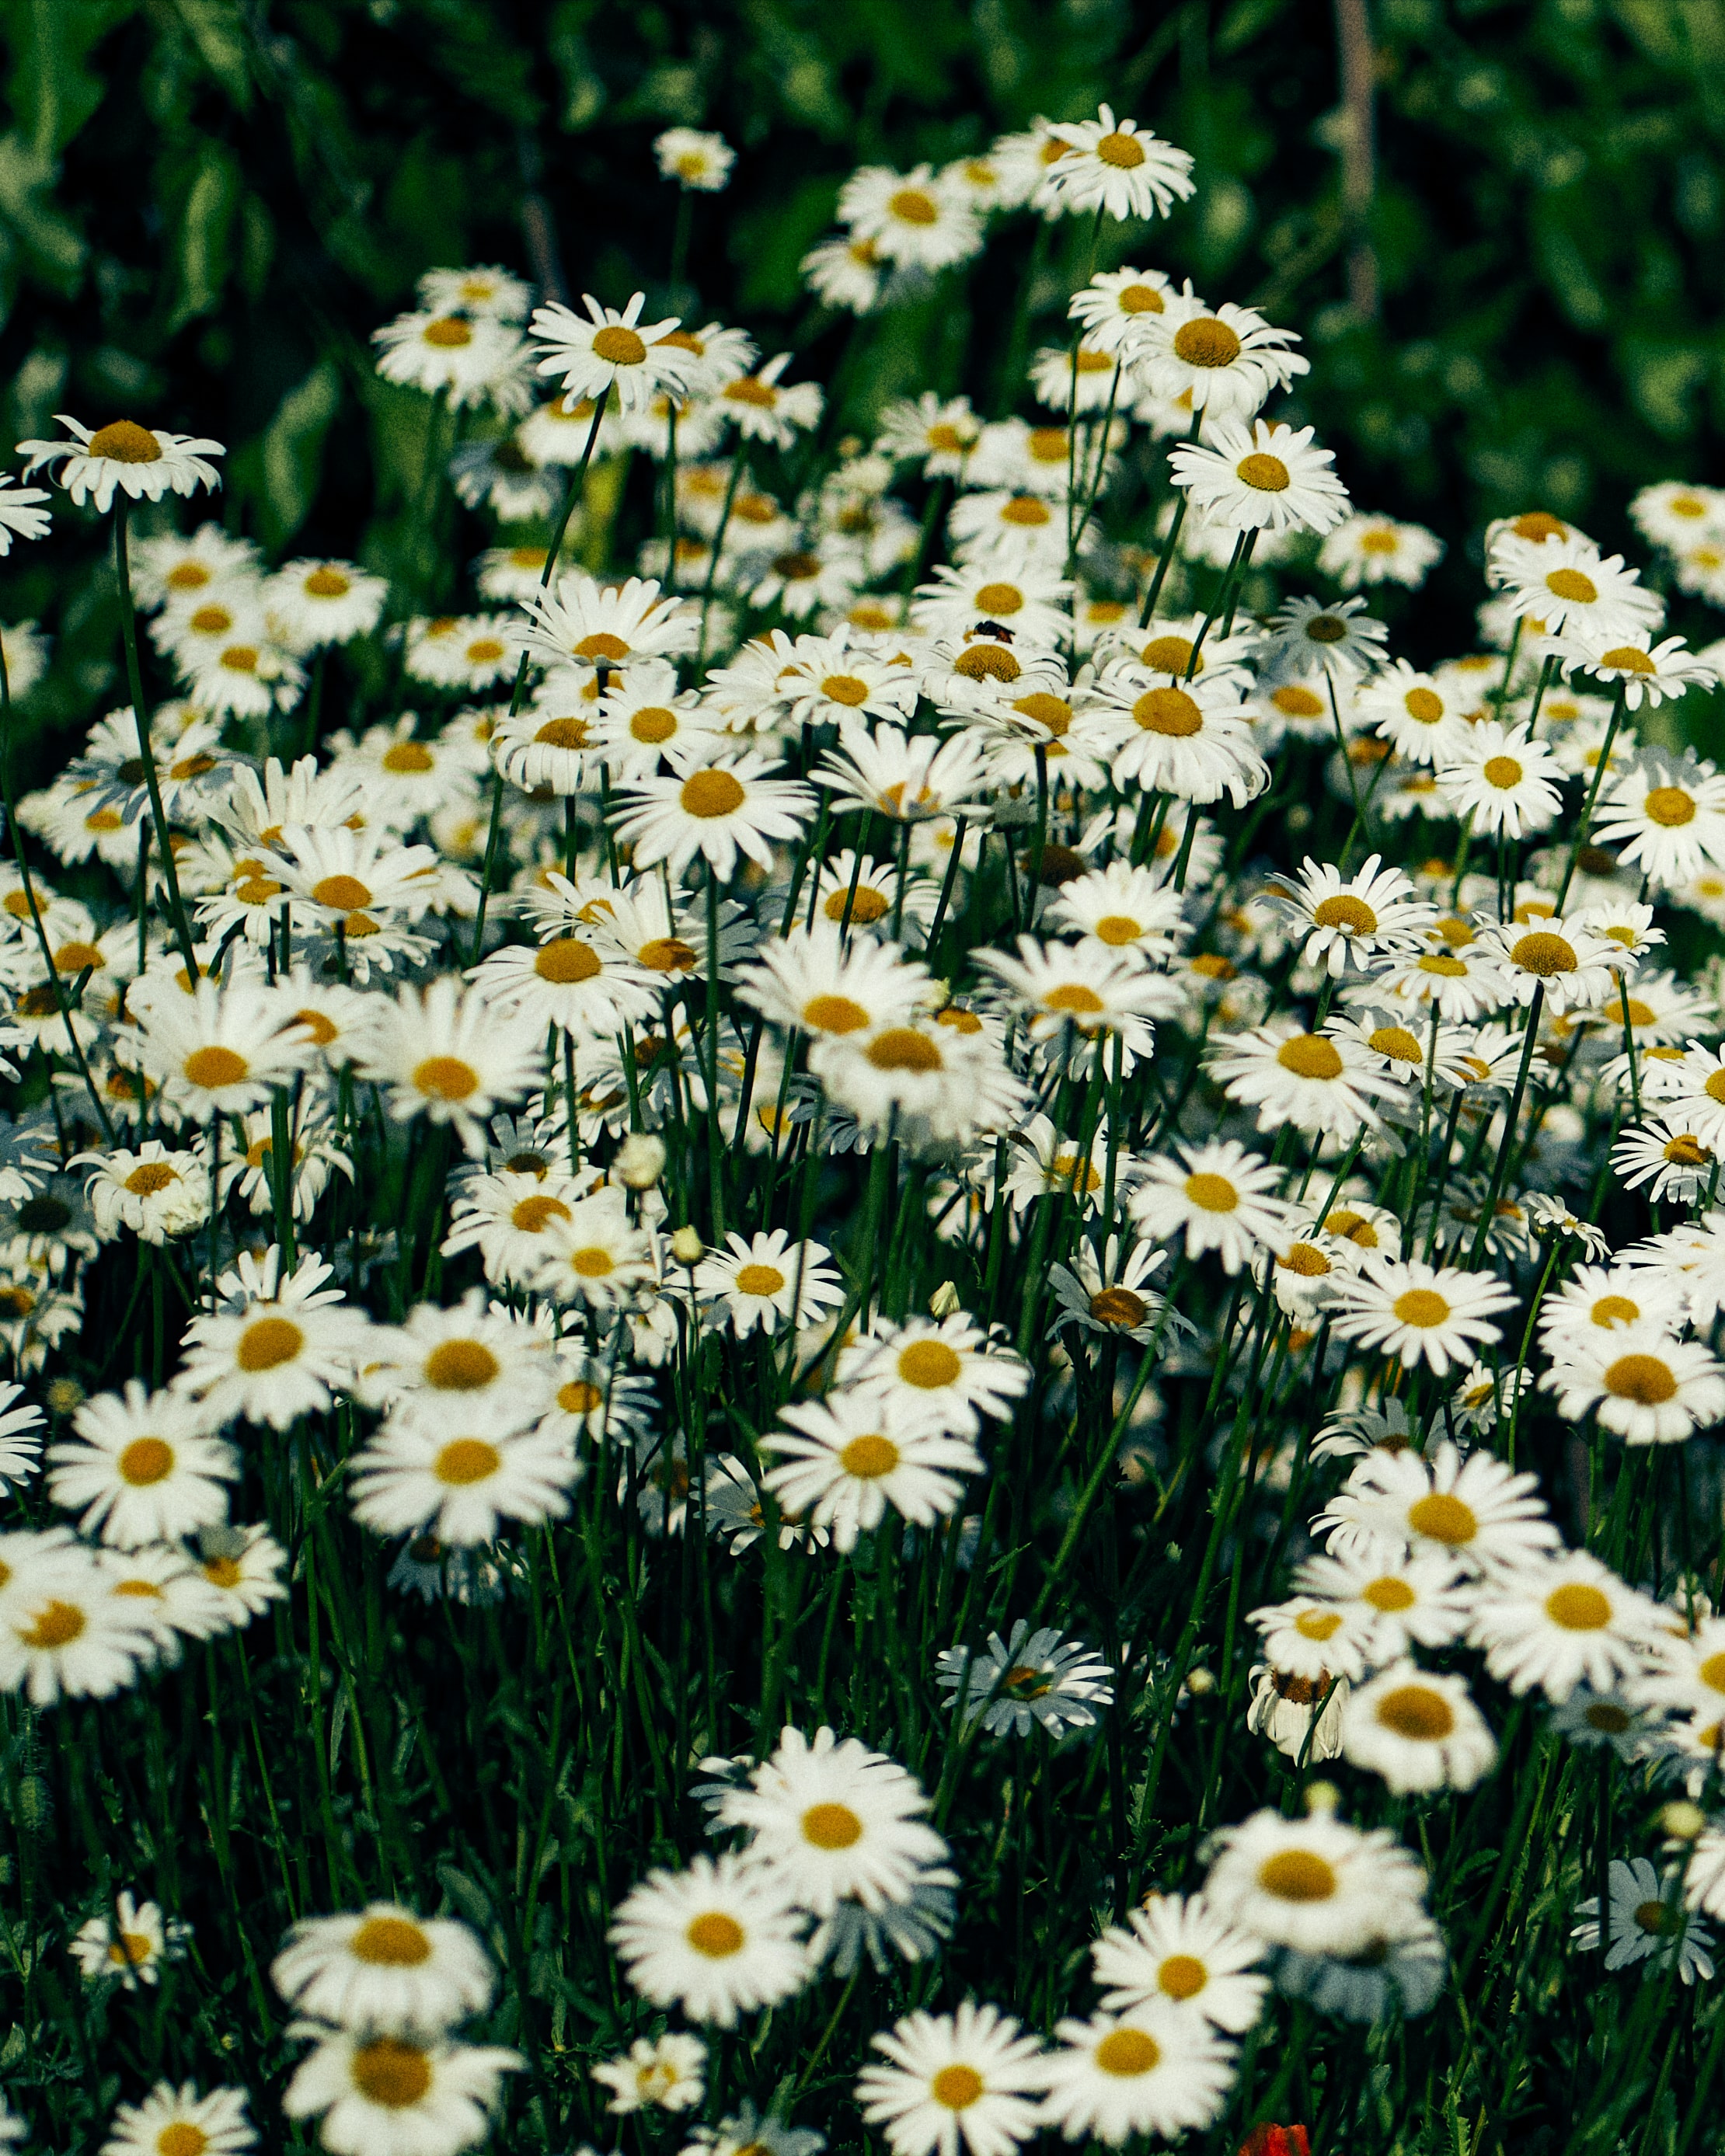 petals, wildflowers, flowers, grass, camomile